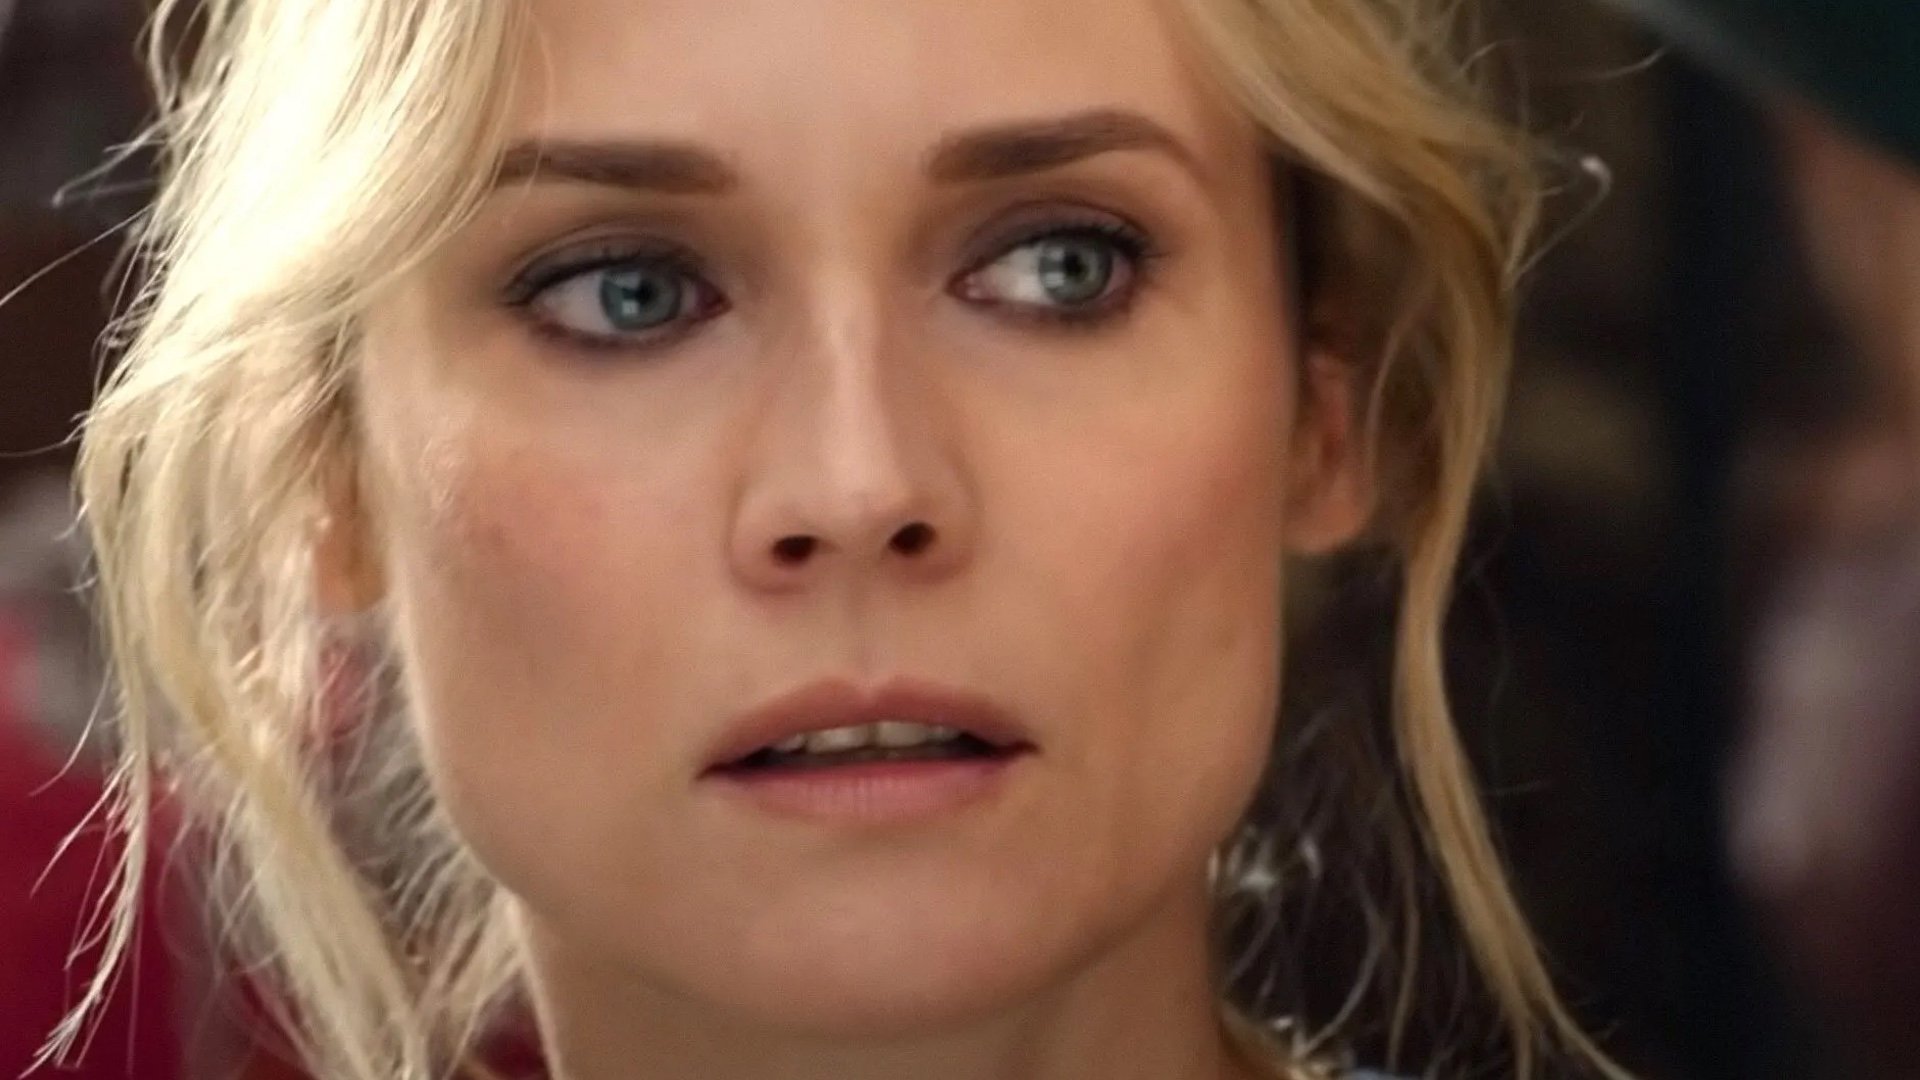 Diane Kruger Will Play Three Characters in David Cronenberg's New